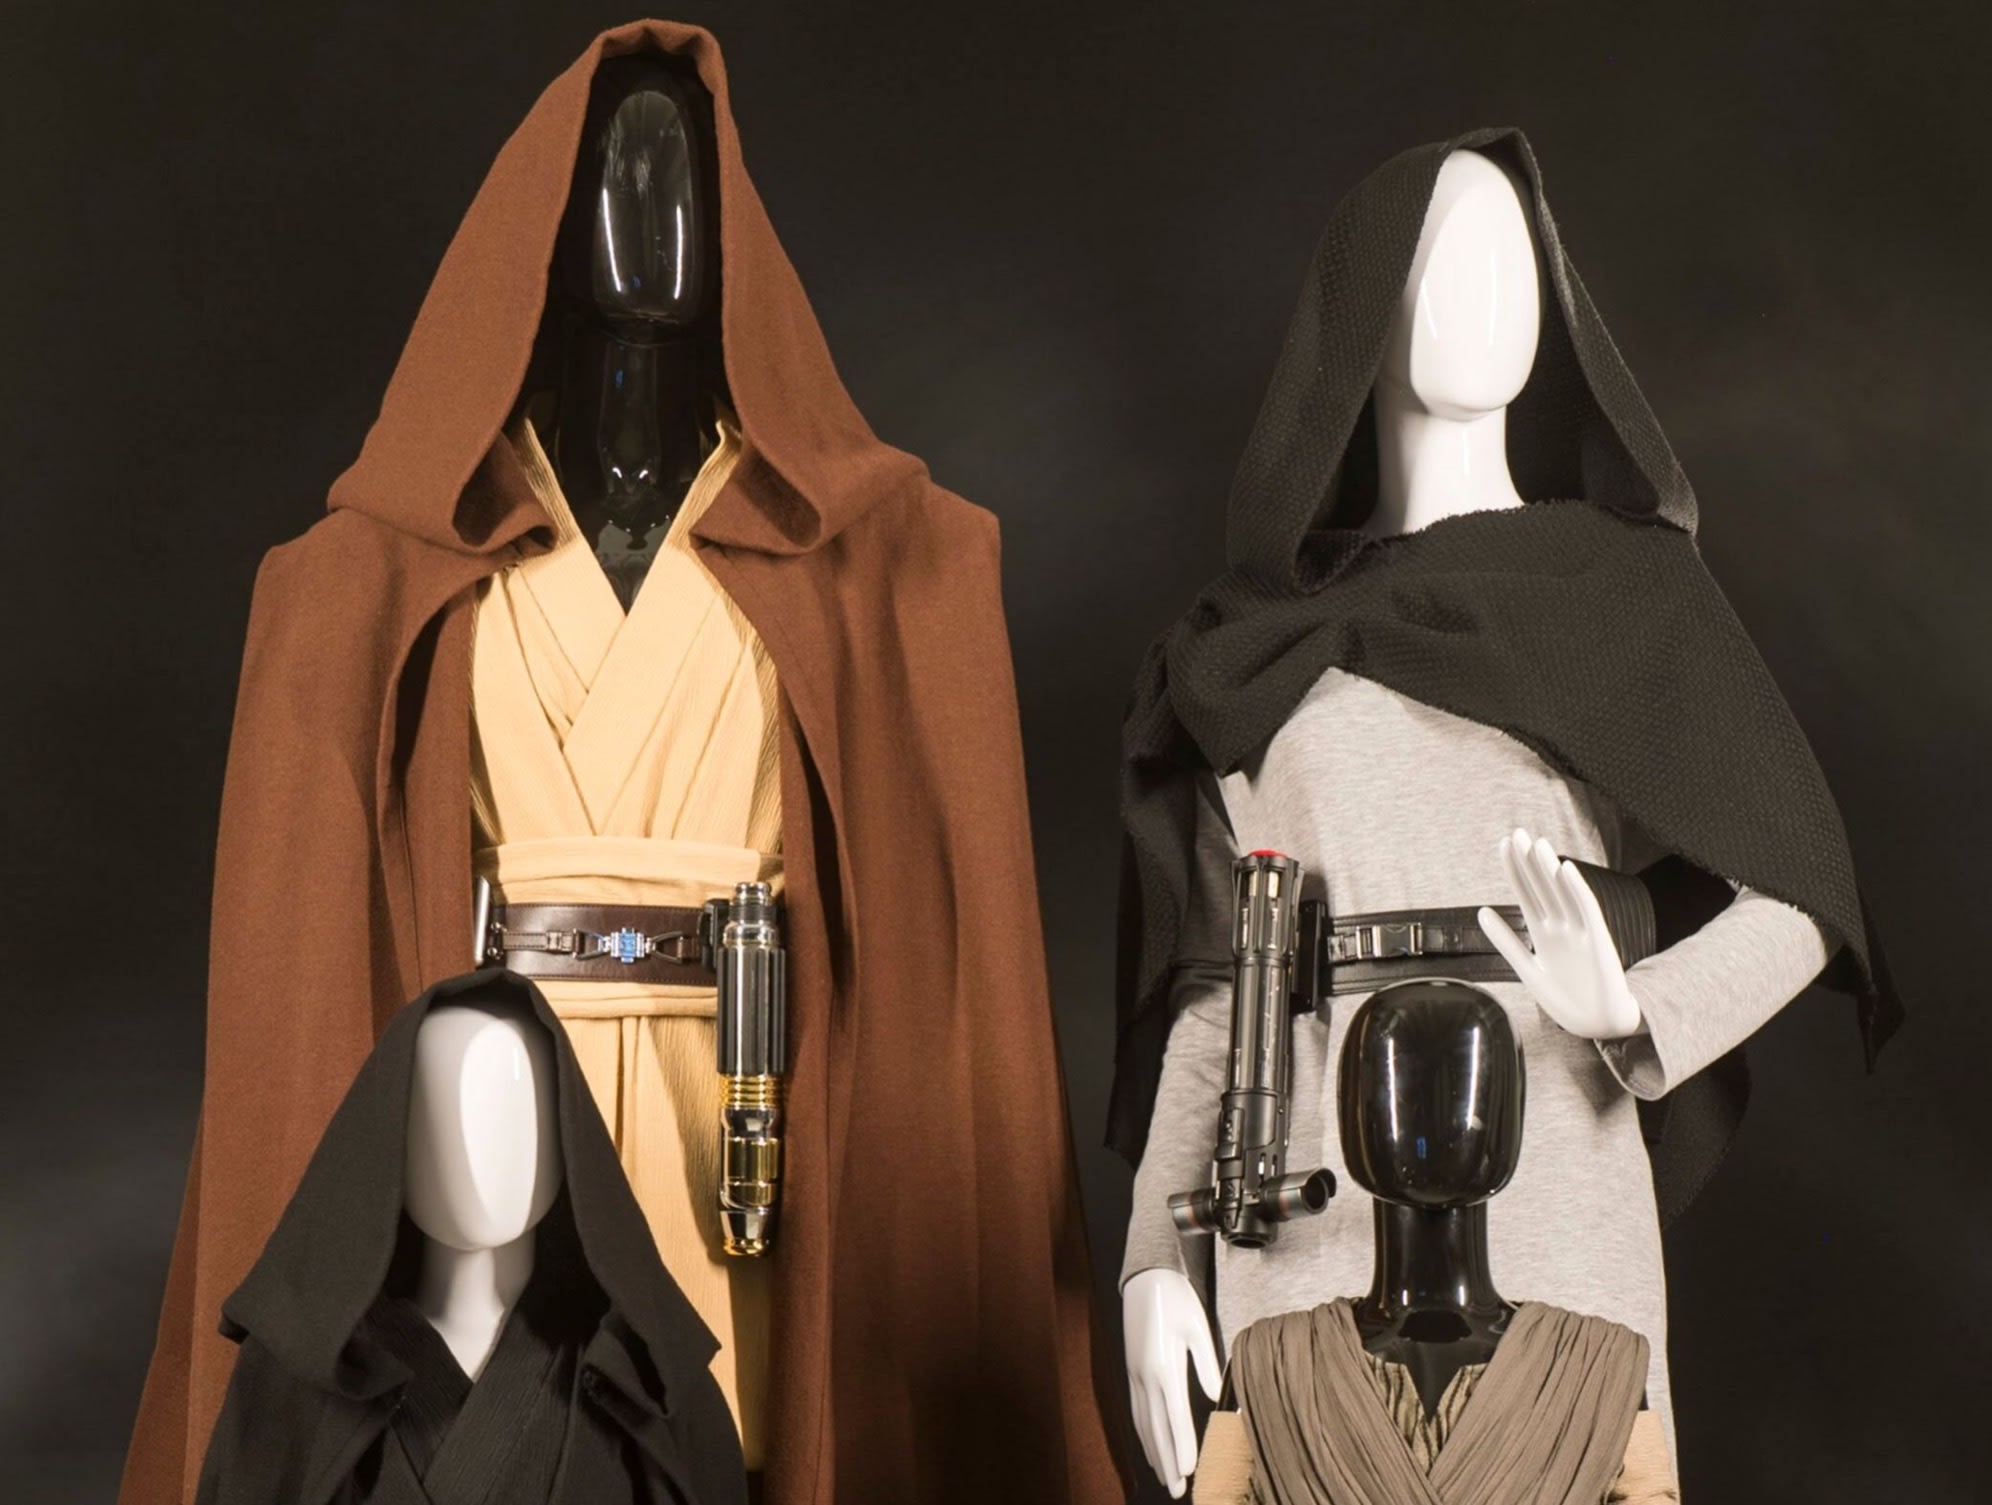 How Much Is A Jedi Robe At Disney World